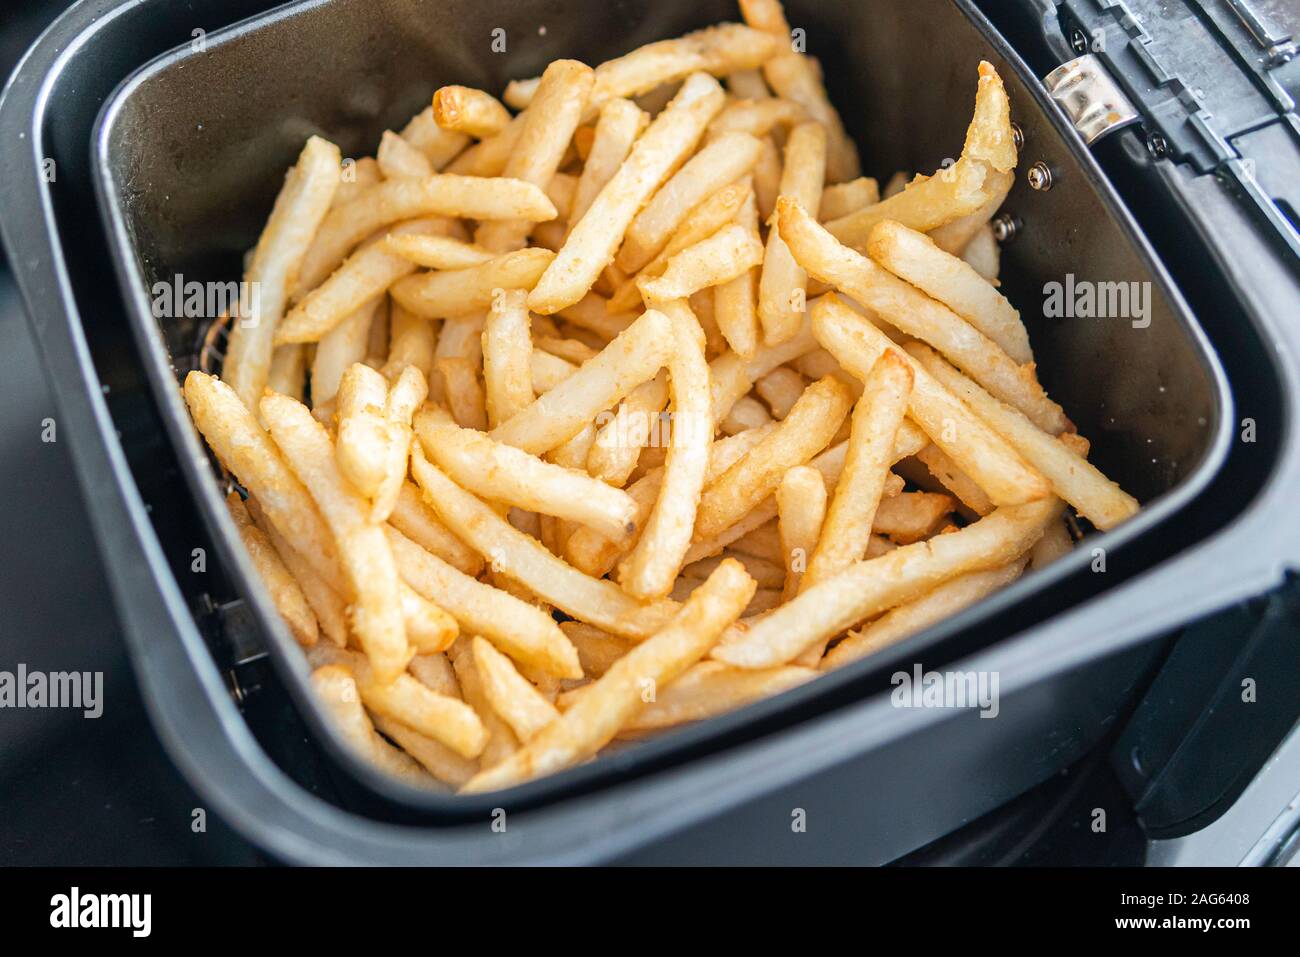 Frech Fries in Deep frier ready to eat Stock Photo